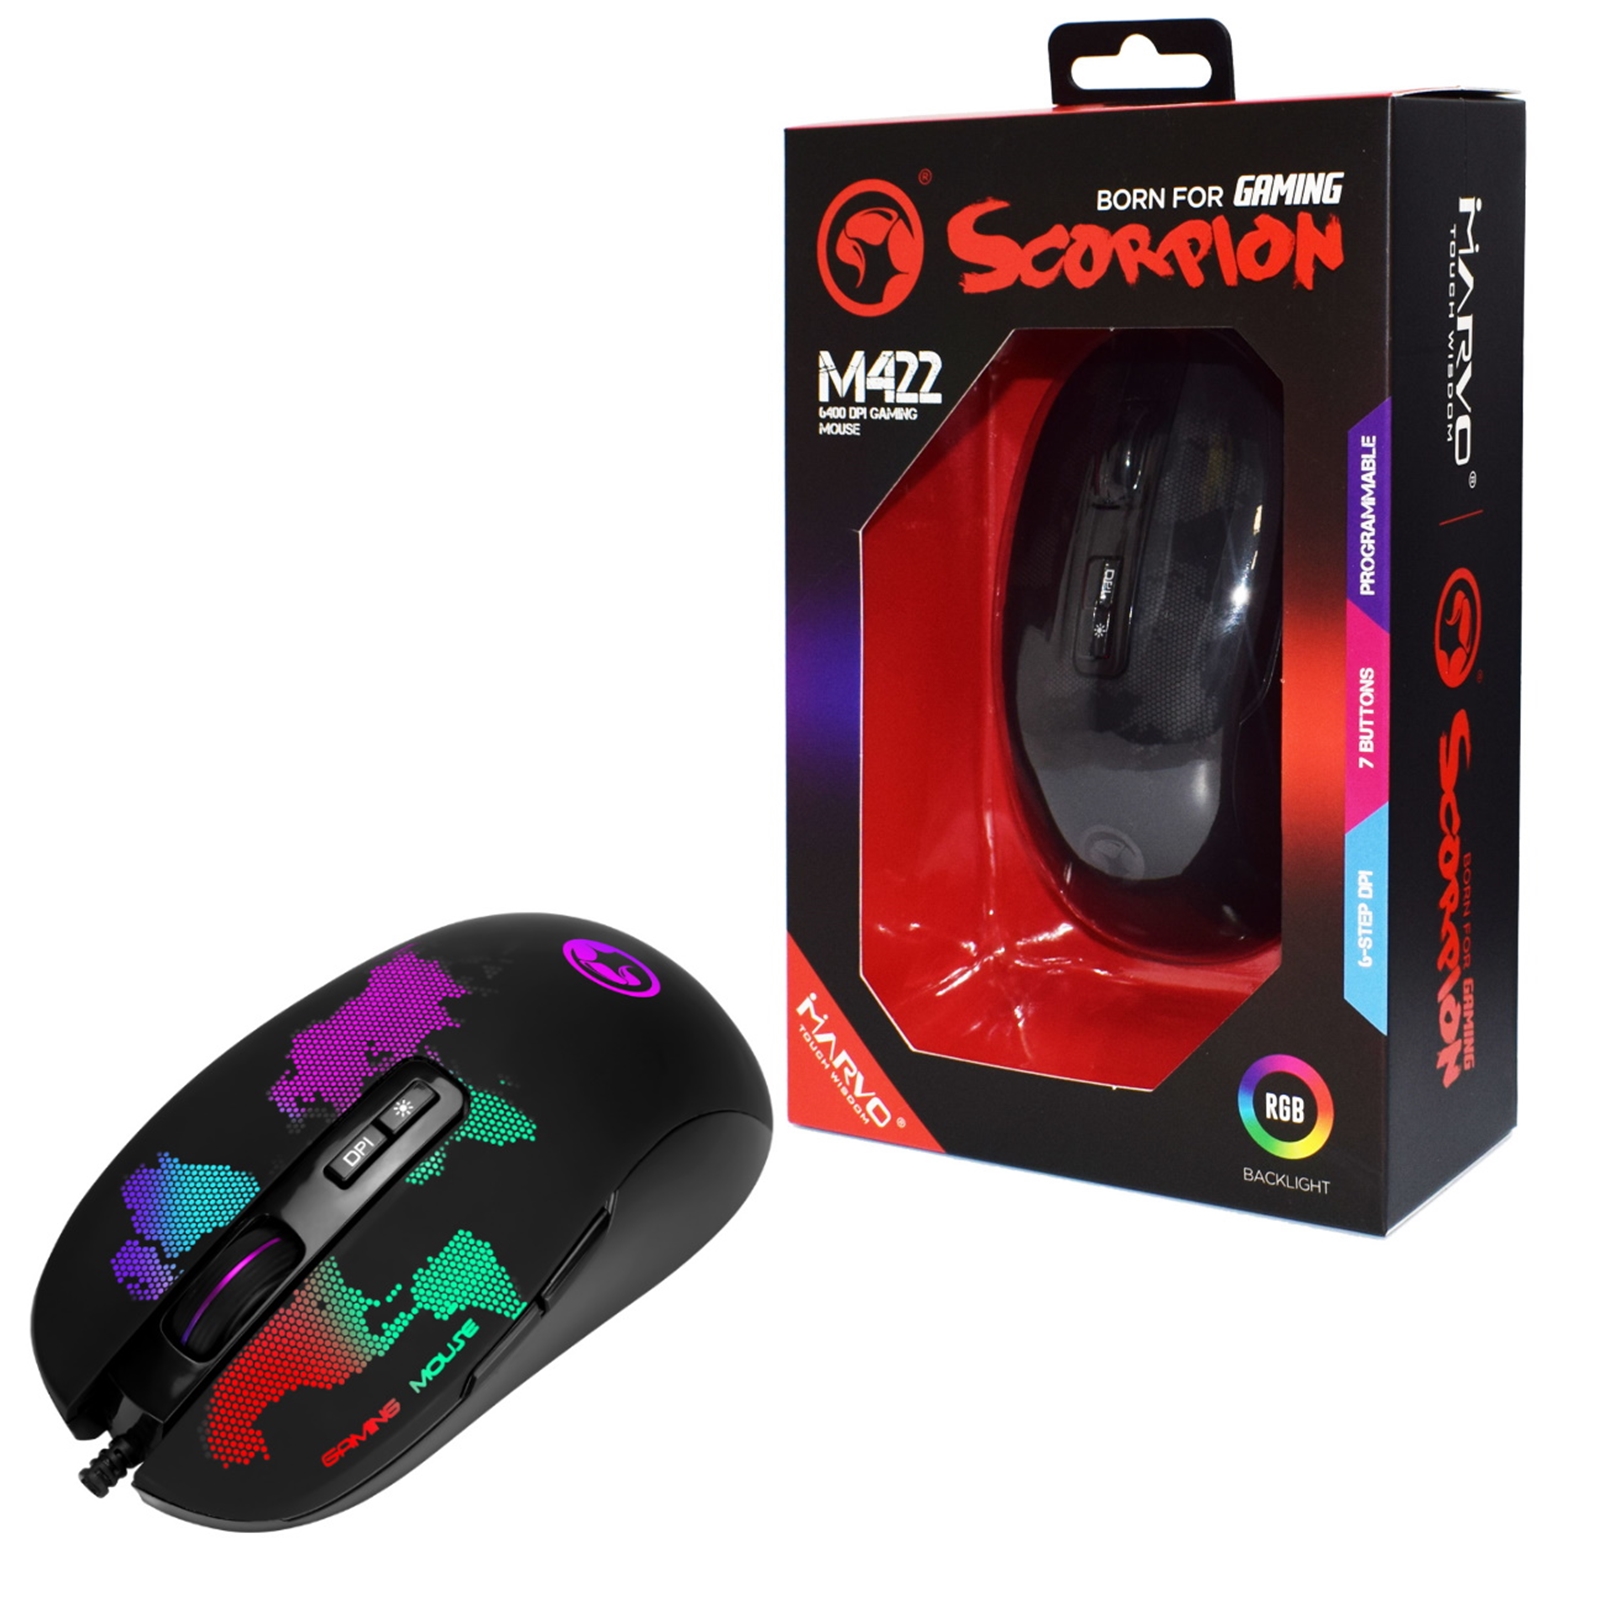 Marvo Scorpion M422 RGB Gaming Mouse, USB 2.0, Low-profile design with multiple lighting schemes, 6 Adjustable DPI levels up to 6400 DPI, Gaming Grade Optical Sensor with 7 Programmable Buttons